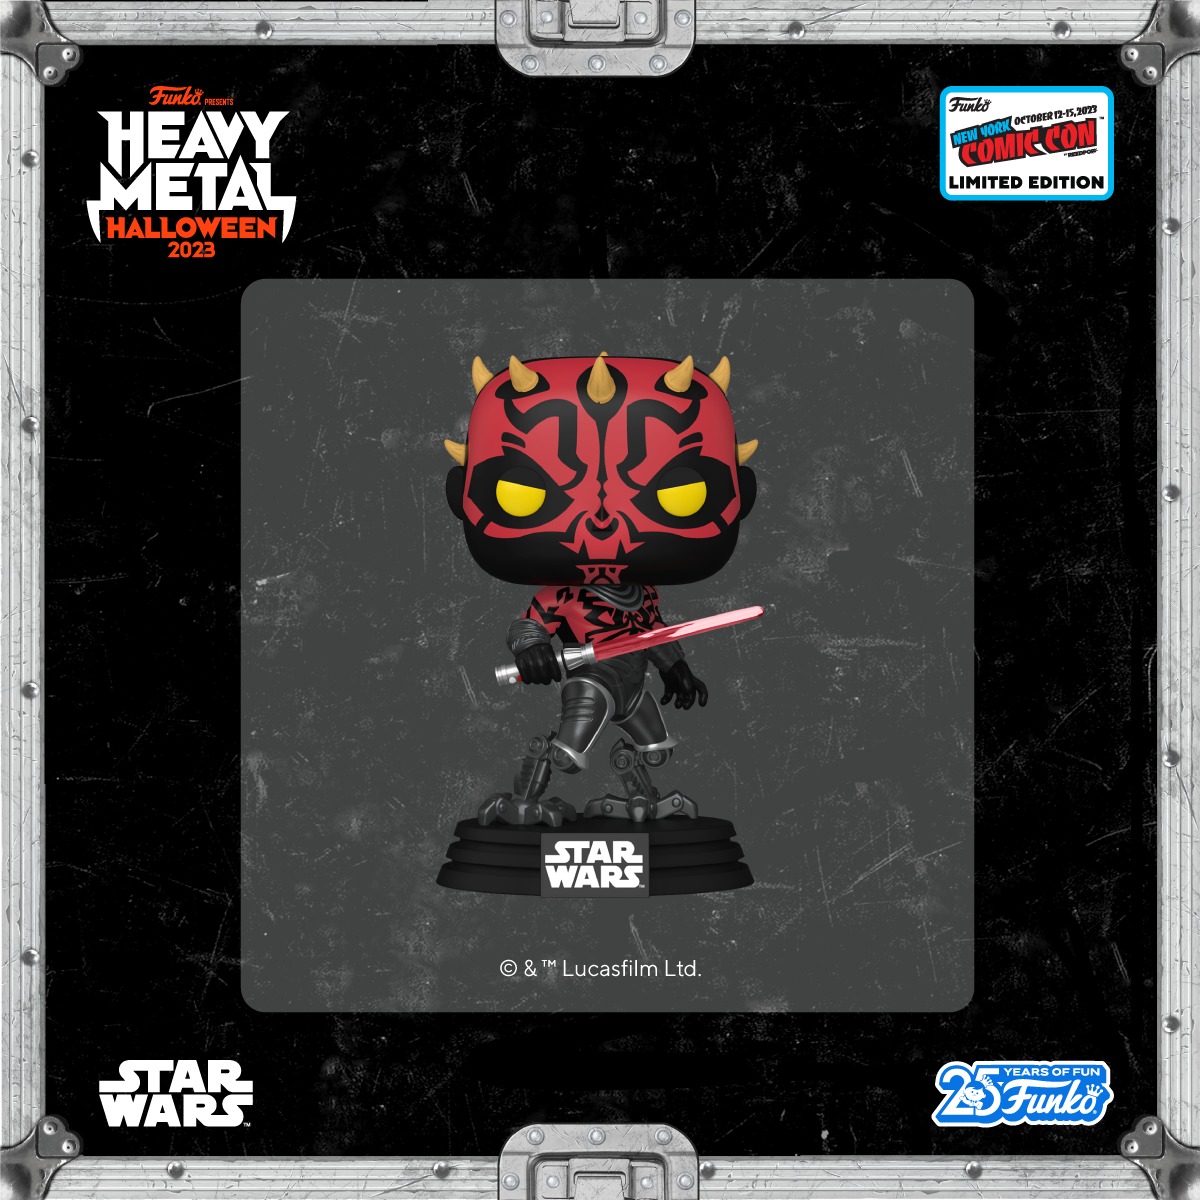 Funko POP! Star Wars: Darth Maul with Cybernetic Legs Funko Pop! Vinyl Figure – NYCC 2023 and Target Shared Exclusive